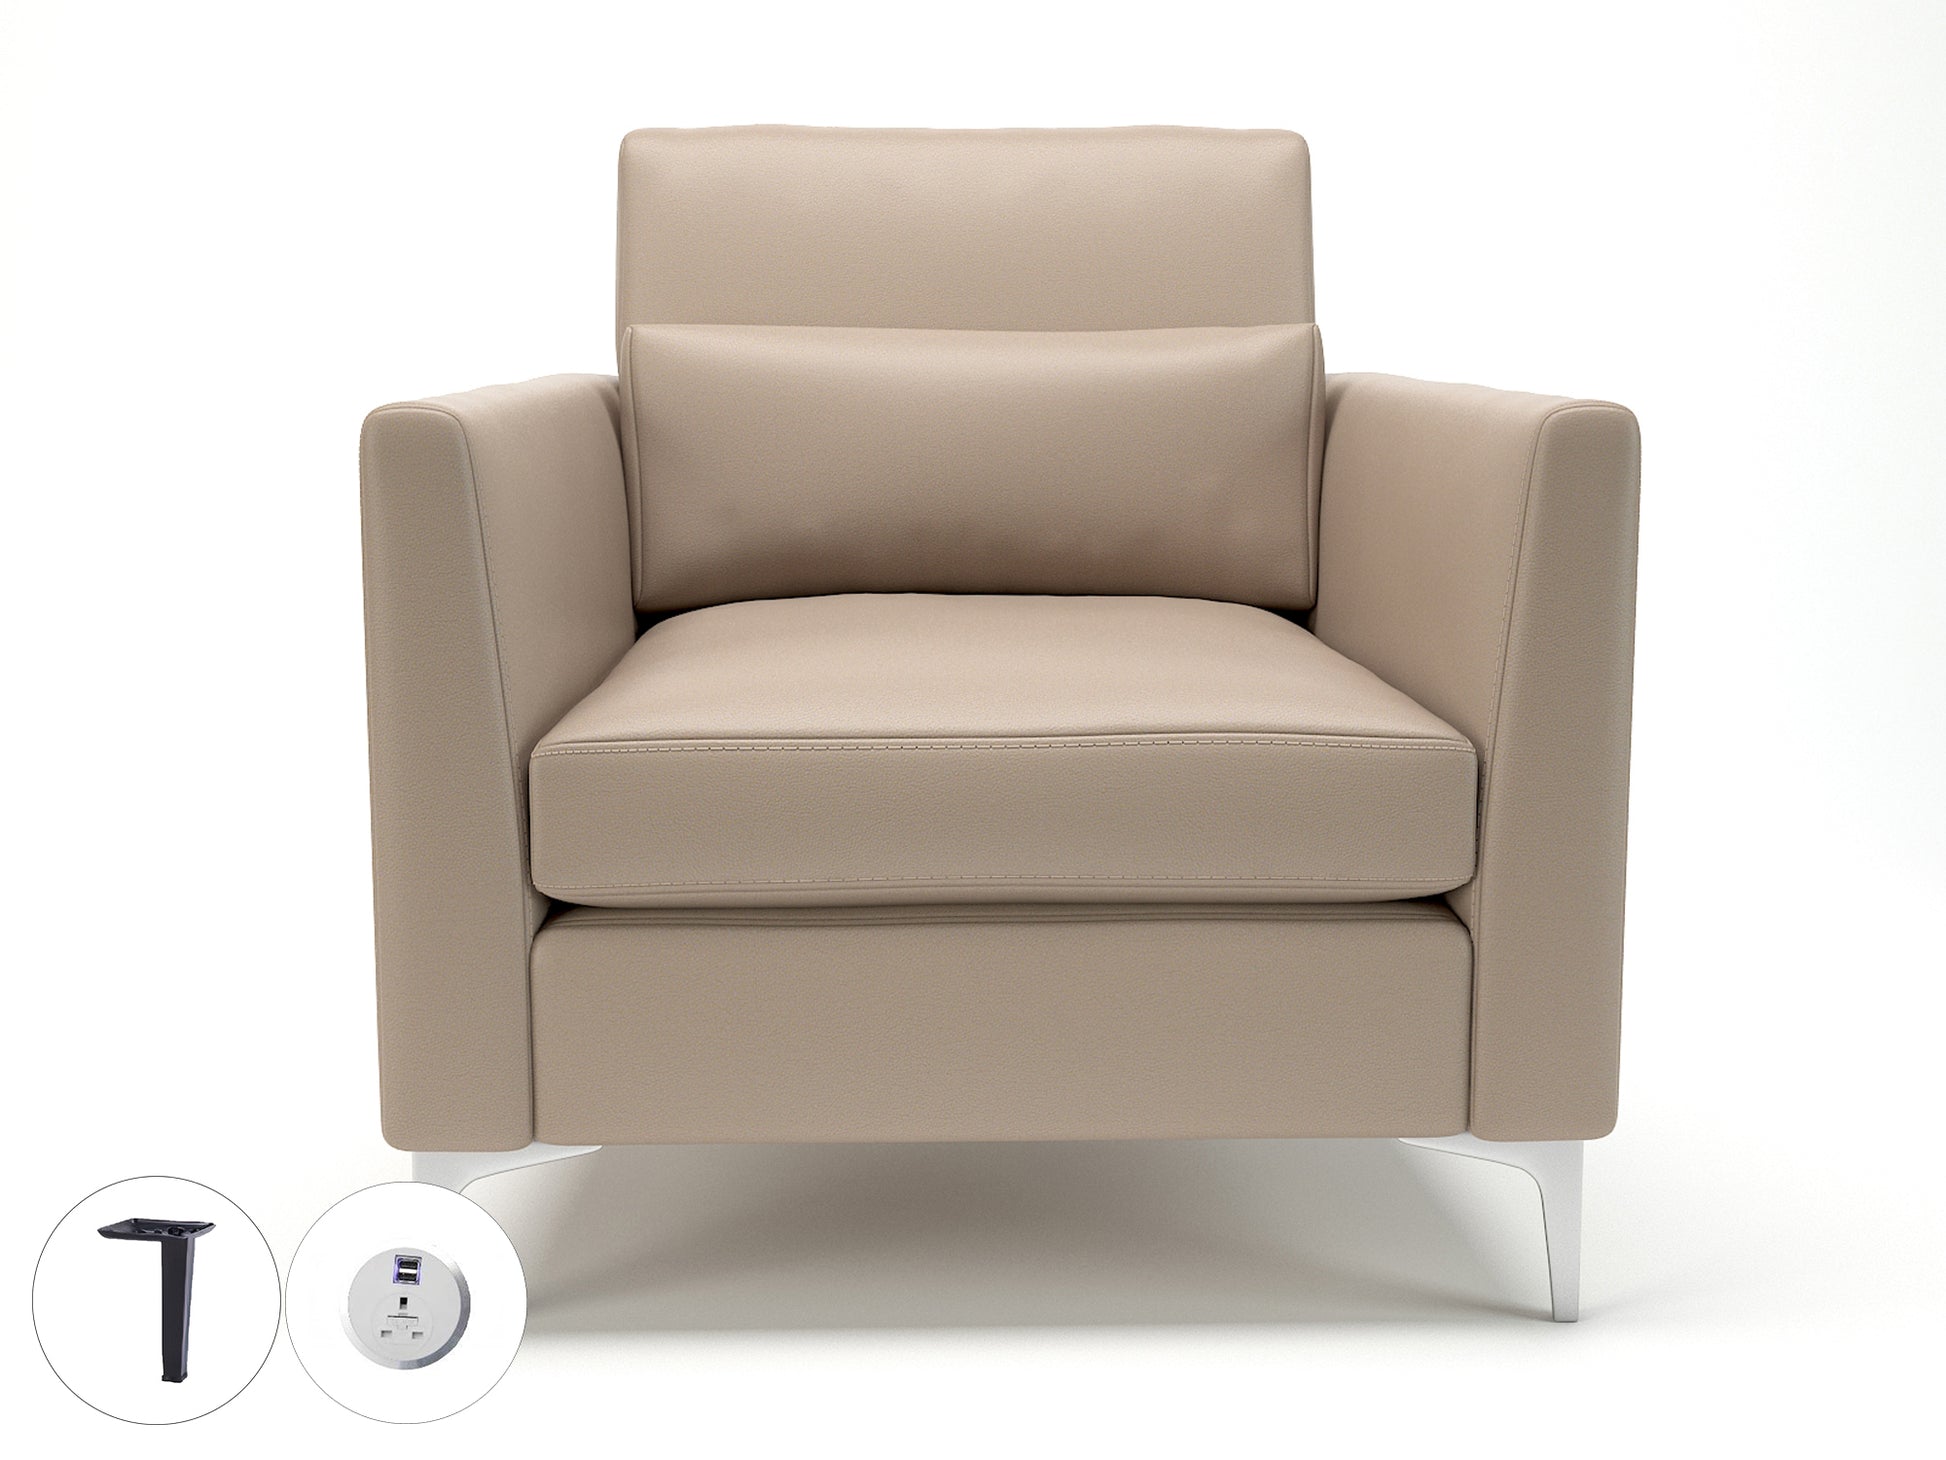 Roselle 90cm Wide Armchair in Cristina Marrone Ultima Faux Leather with Socket